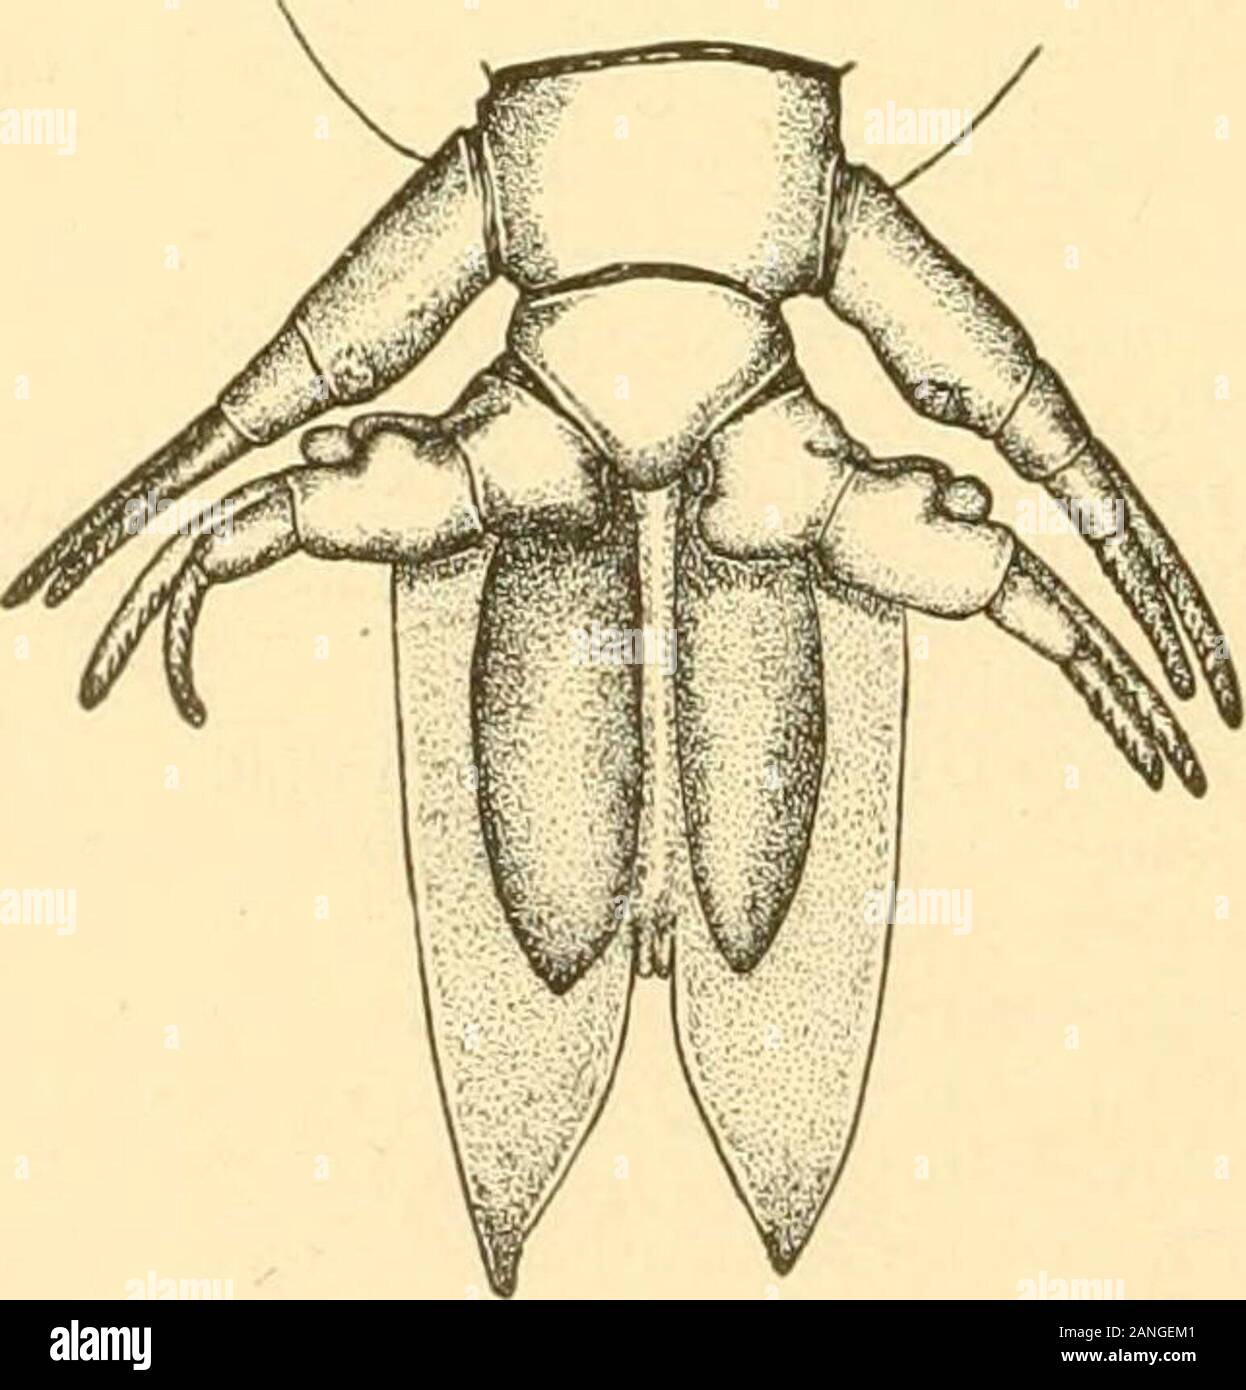 Bulletin of the Bureau of Fisheries . Anjultia alosae orsal Rurface; /&lt;. ventral surface; c, posterior maxilliped; &lt;l, antennae.. 7 m w.Argulus alow. Gould. Mali. Posterior legs andabdomen. eggs must be considerably larger than those of the other species and comparatively few in number,judging from the ripe females examined. A specimen from near Key West, Fla., taken in April, wasfull of apparently ripe eggs. Probably the species lays a little later than tins around Woods Hole. ARGlI.lD.K OF THE WOODS HOLE REGION. L23 Argulus catostomi Dana & Herrick. Female only known. Carapace large, o Stock Photo